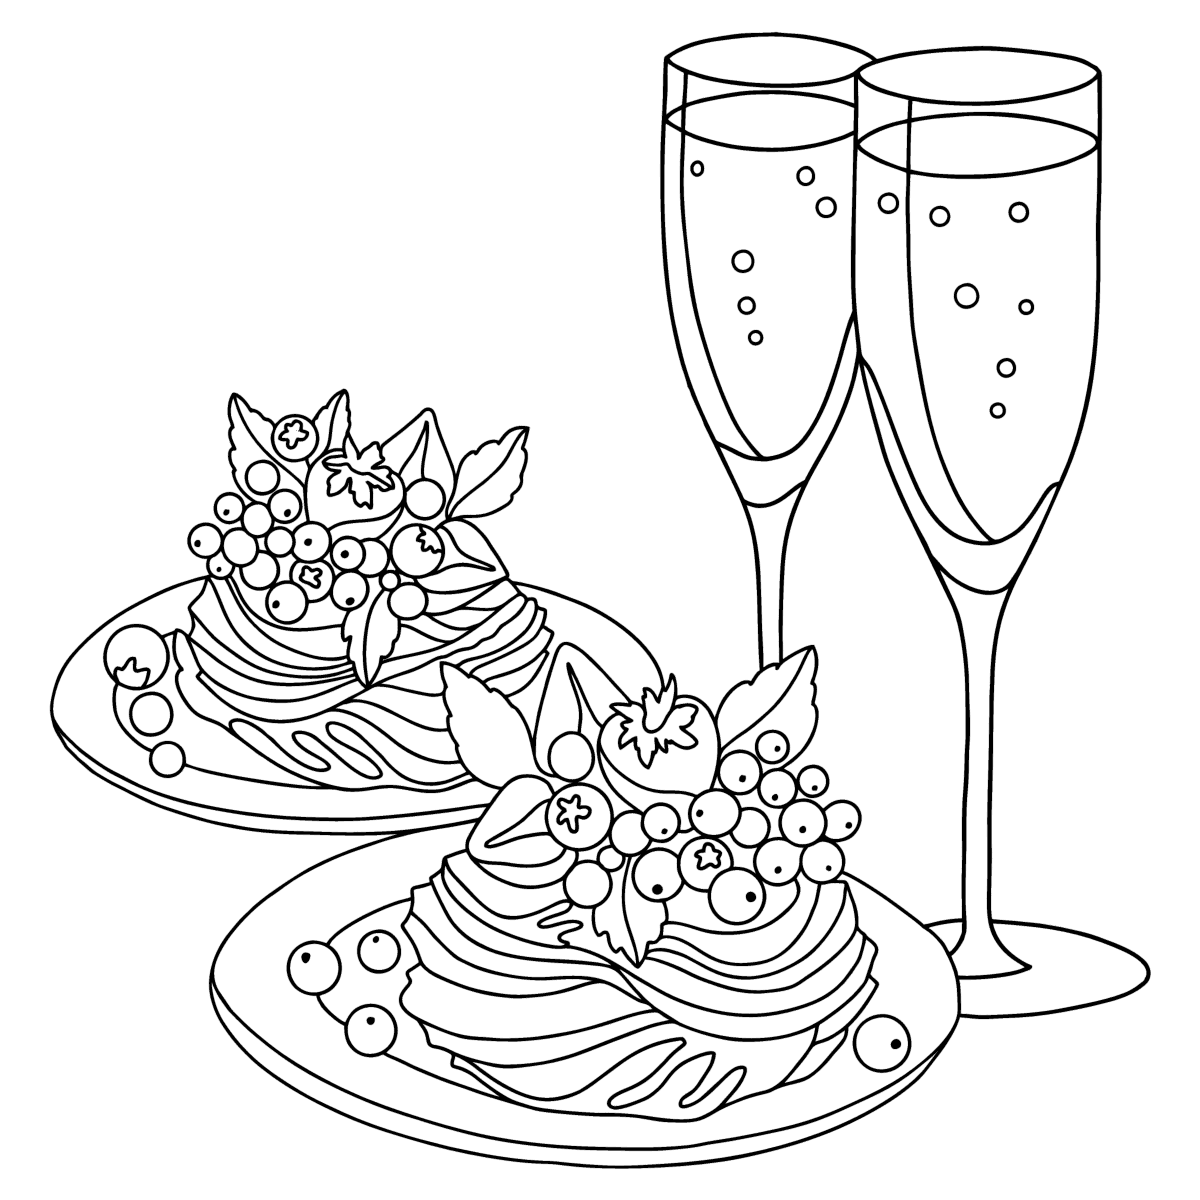 Sweets and champagne - Valentine's Day coloring pages for Adults